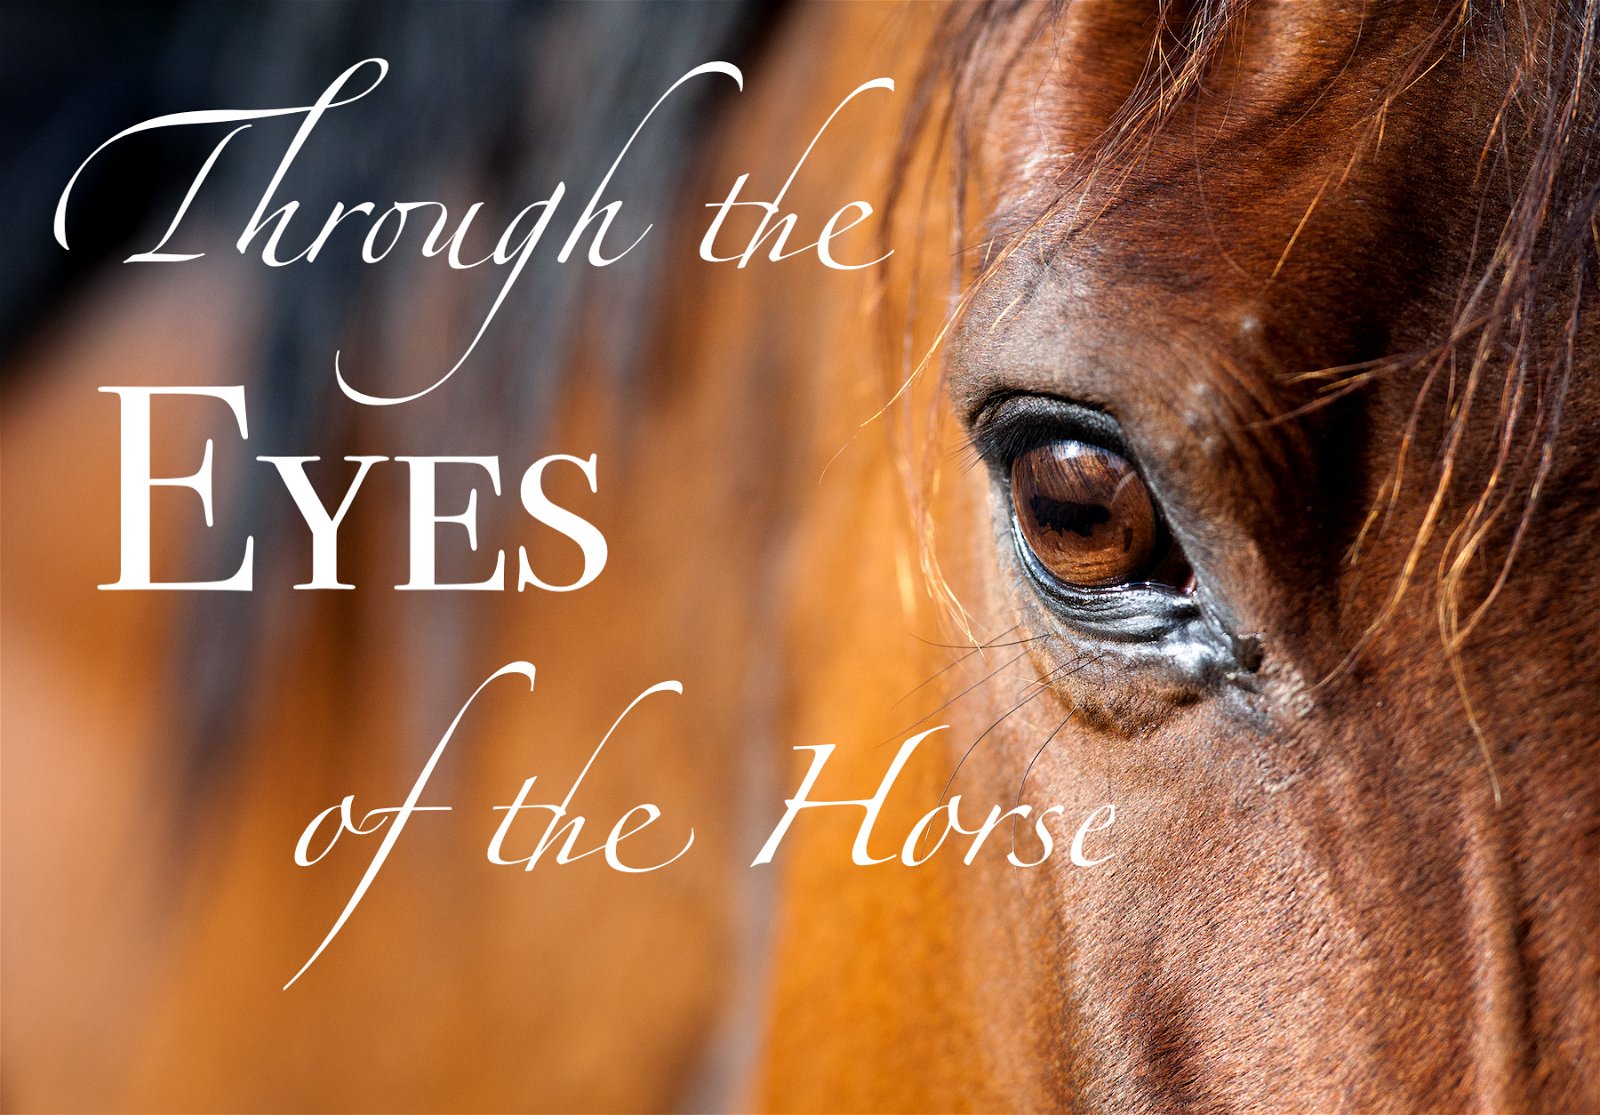 Through the Eyes of the Horse